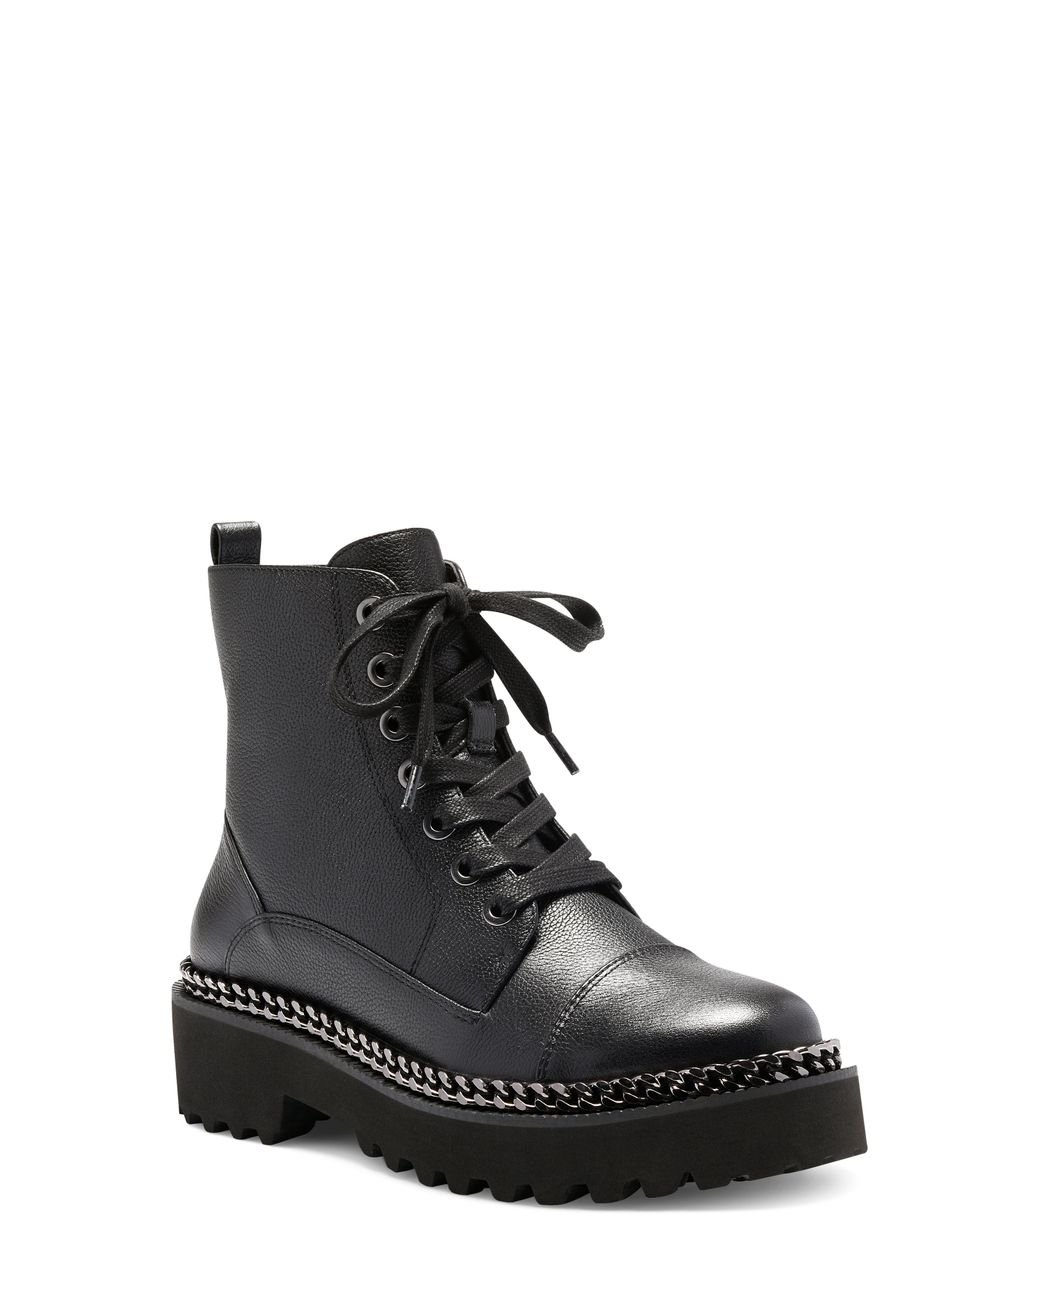 Vince Camuto Mindinta Chain Trim Combat Boot in Black